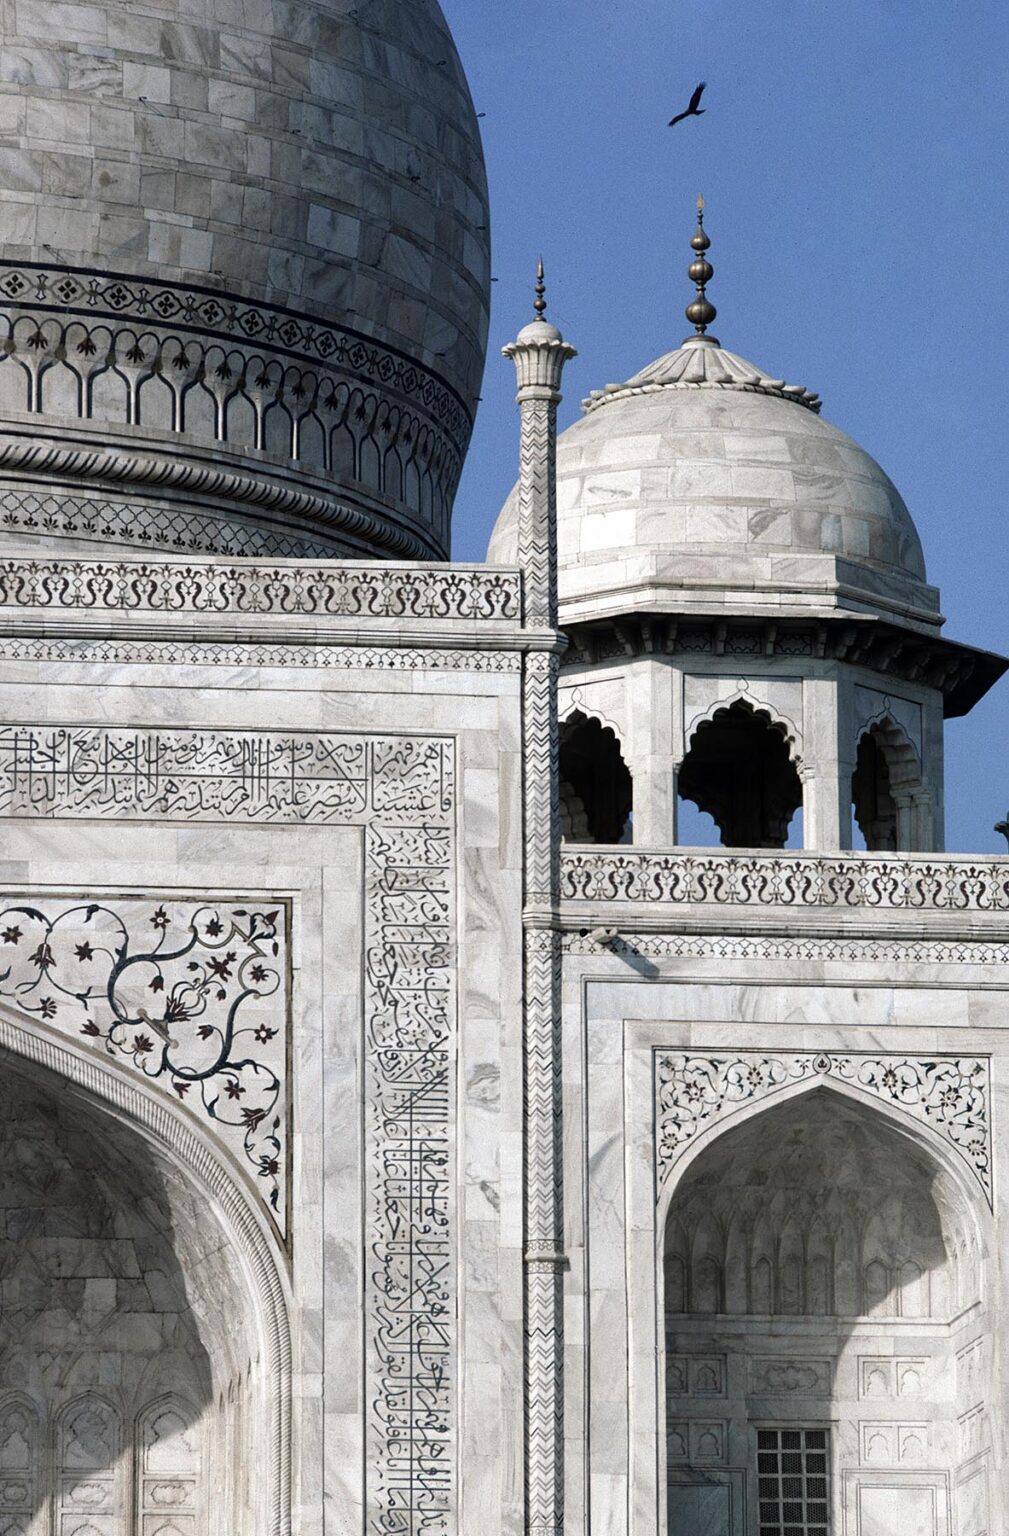 Detail of smaller domes of the TAJ MAHAL, built by emperor Shahjahan for his wife in 1653 - AGRA, INDIA